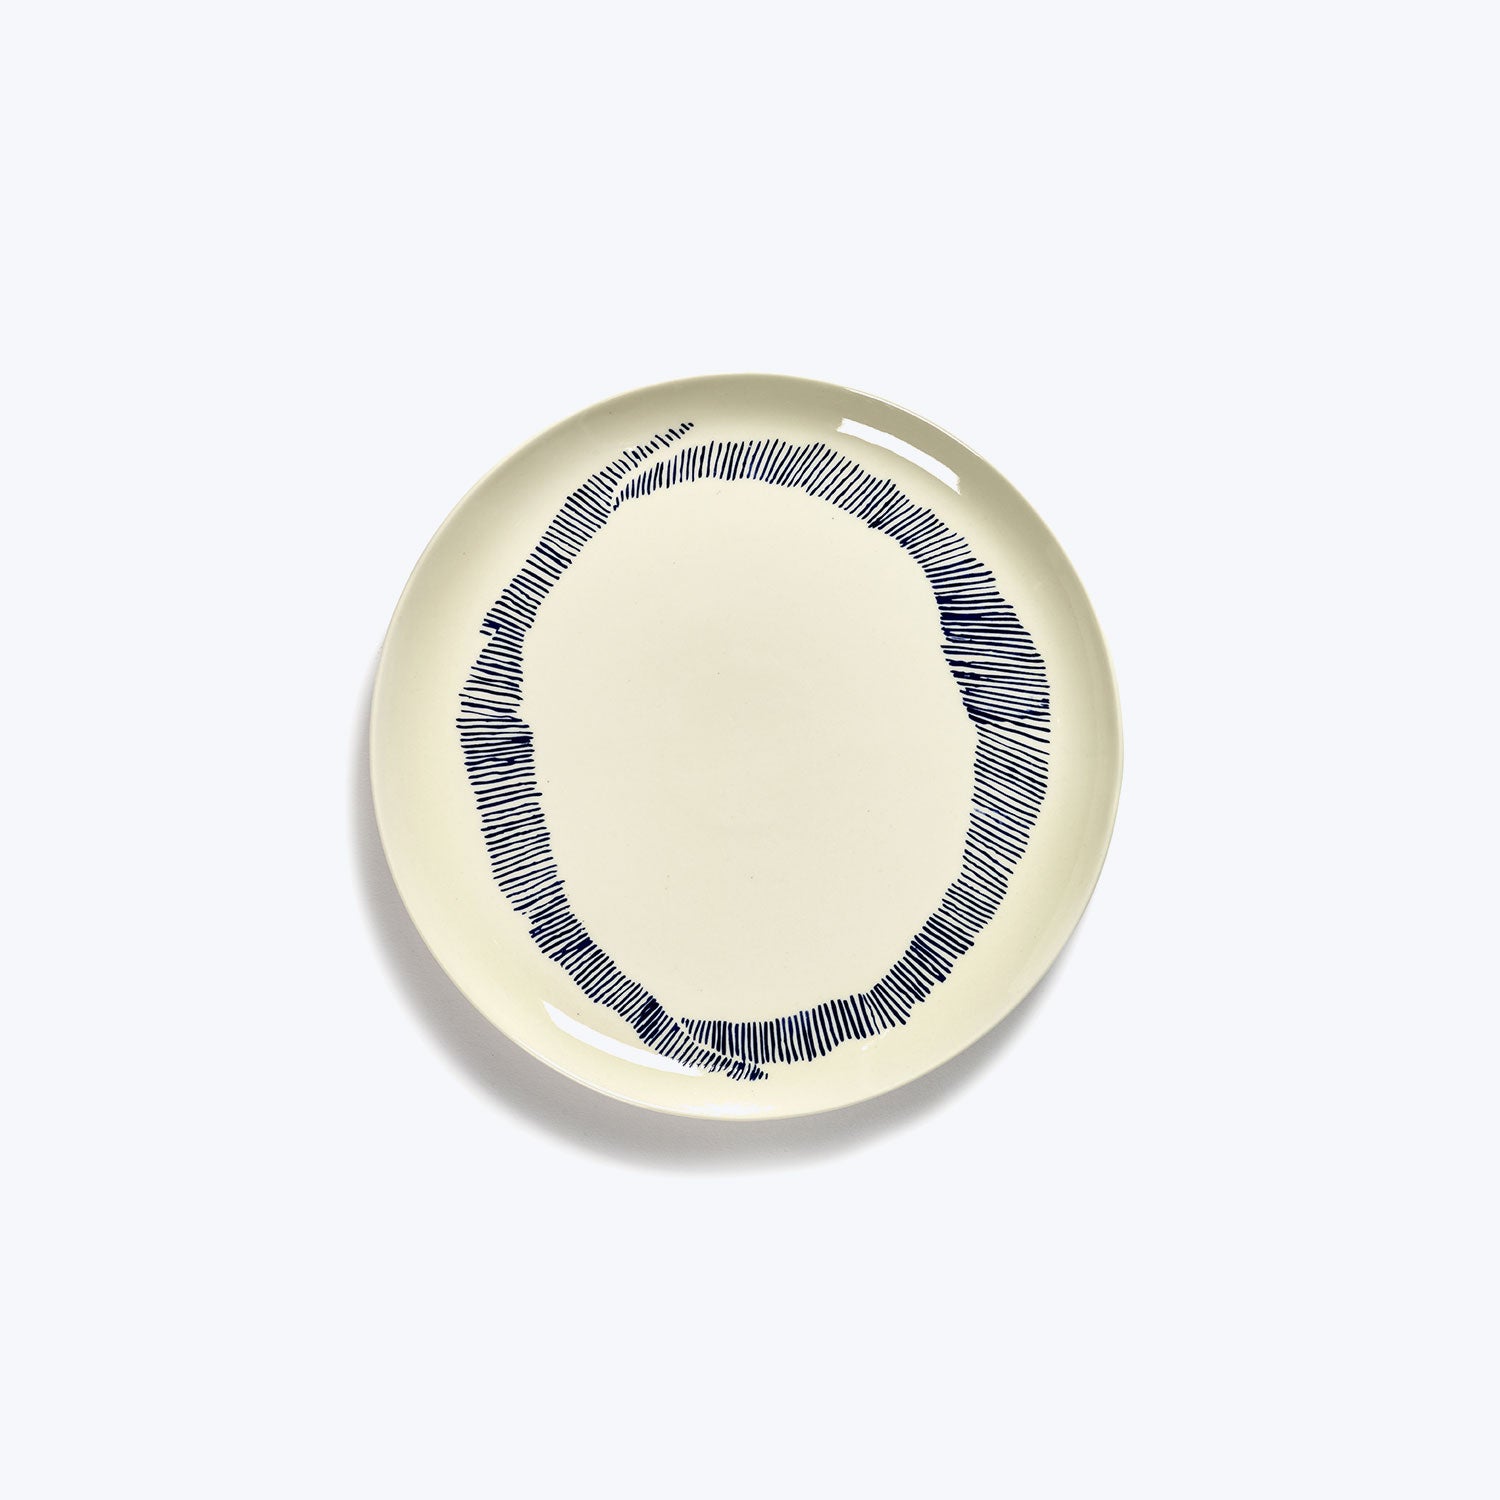 Feast Charger Plates, Set of 2